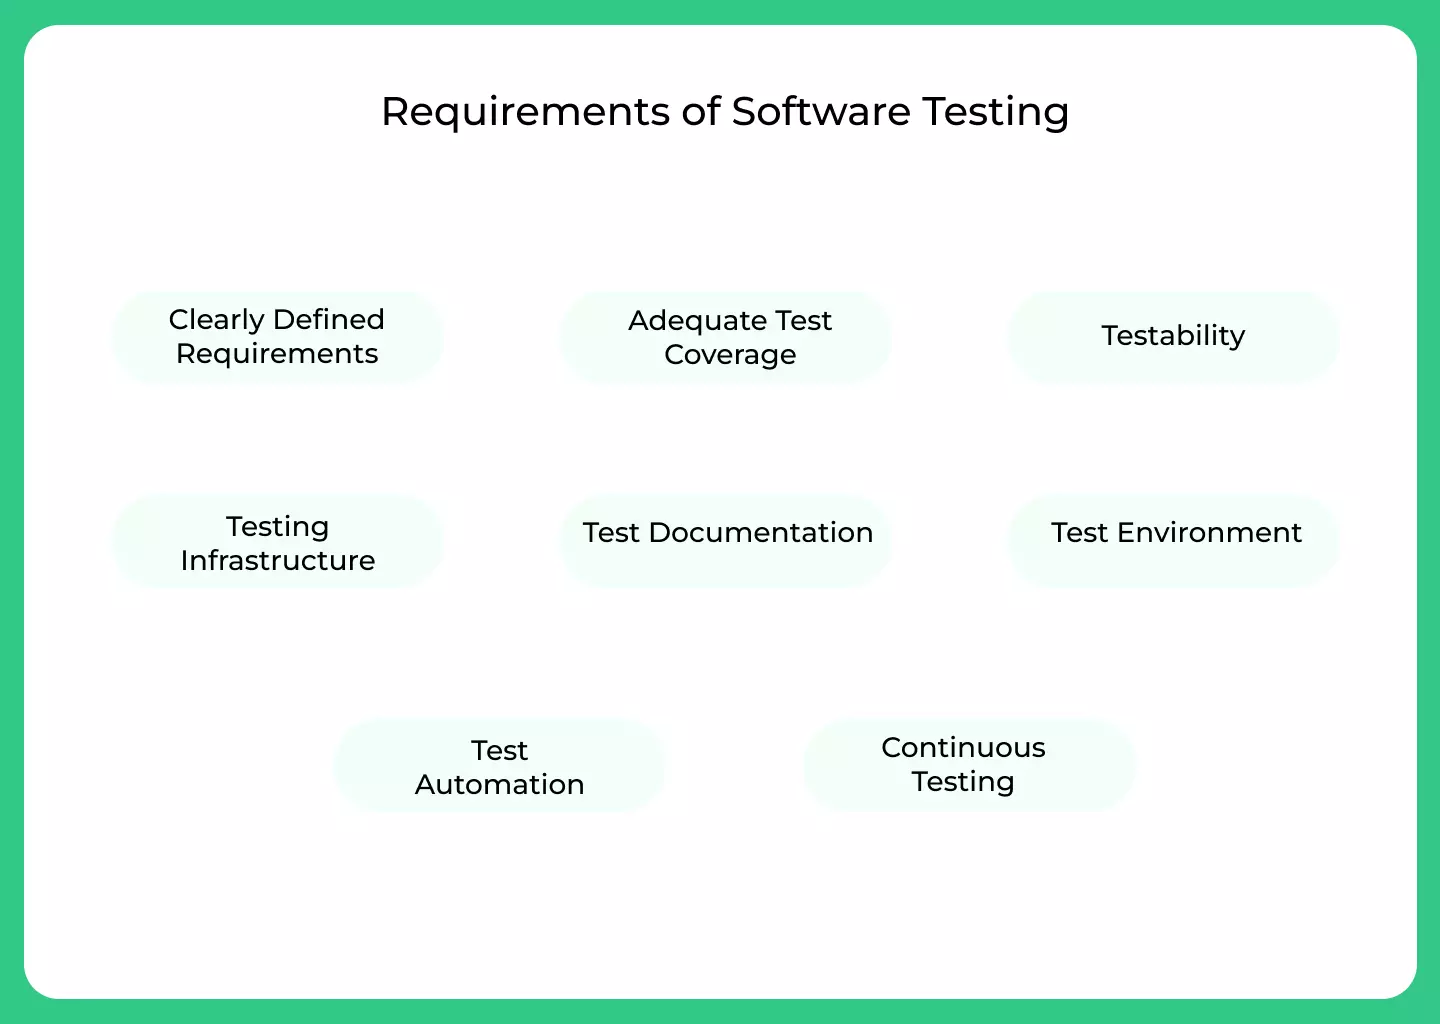 Requirements of Software Testing